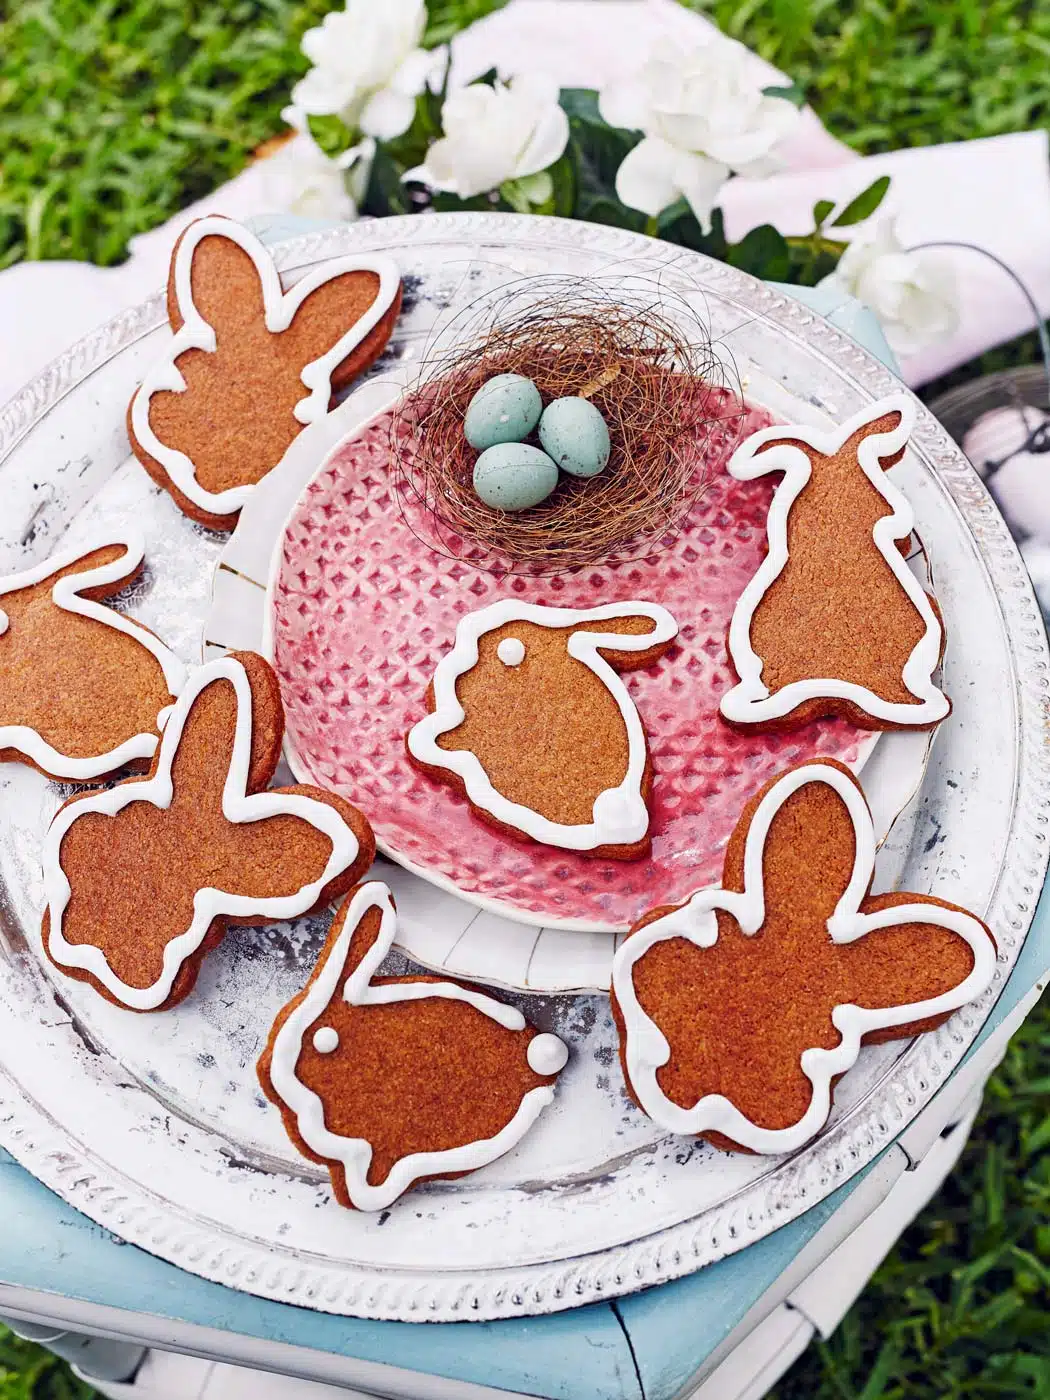 Ginger Easter bunnies